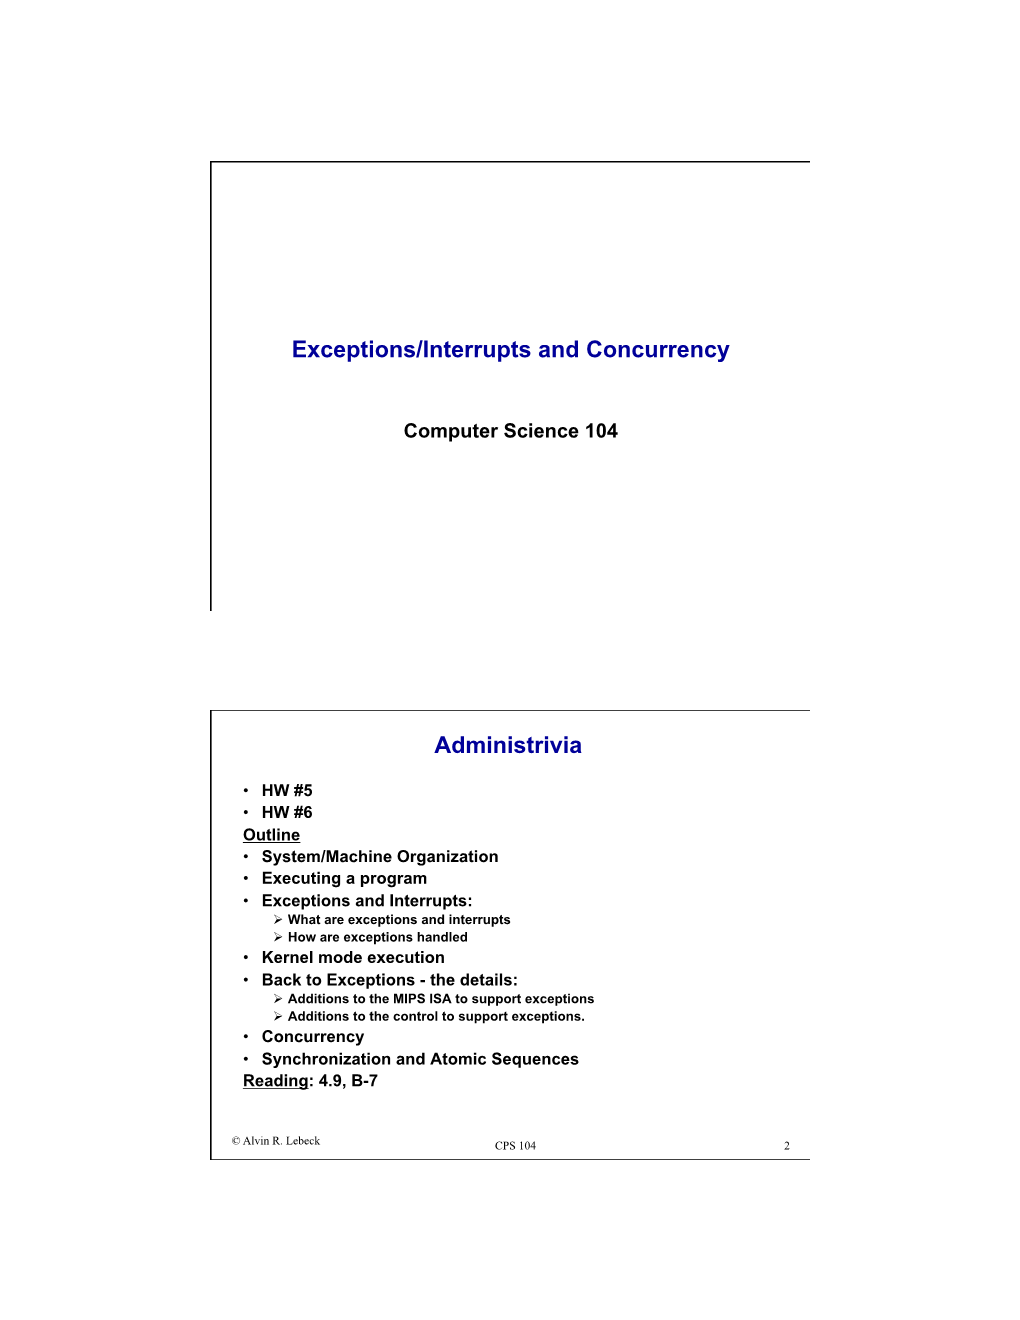 Exceptions/Interrupts and Concurrency Administrivia